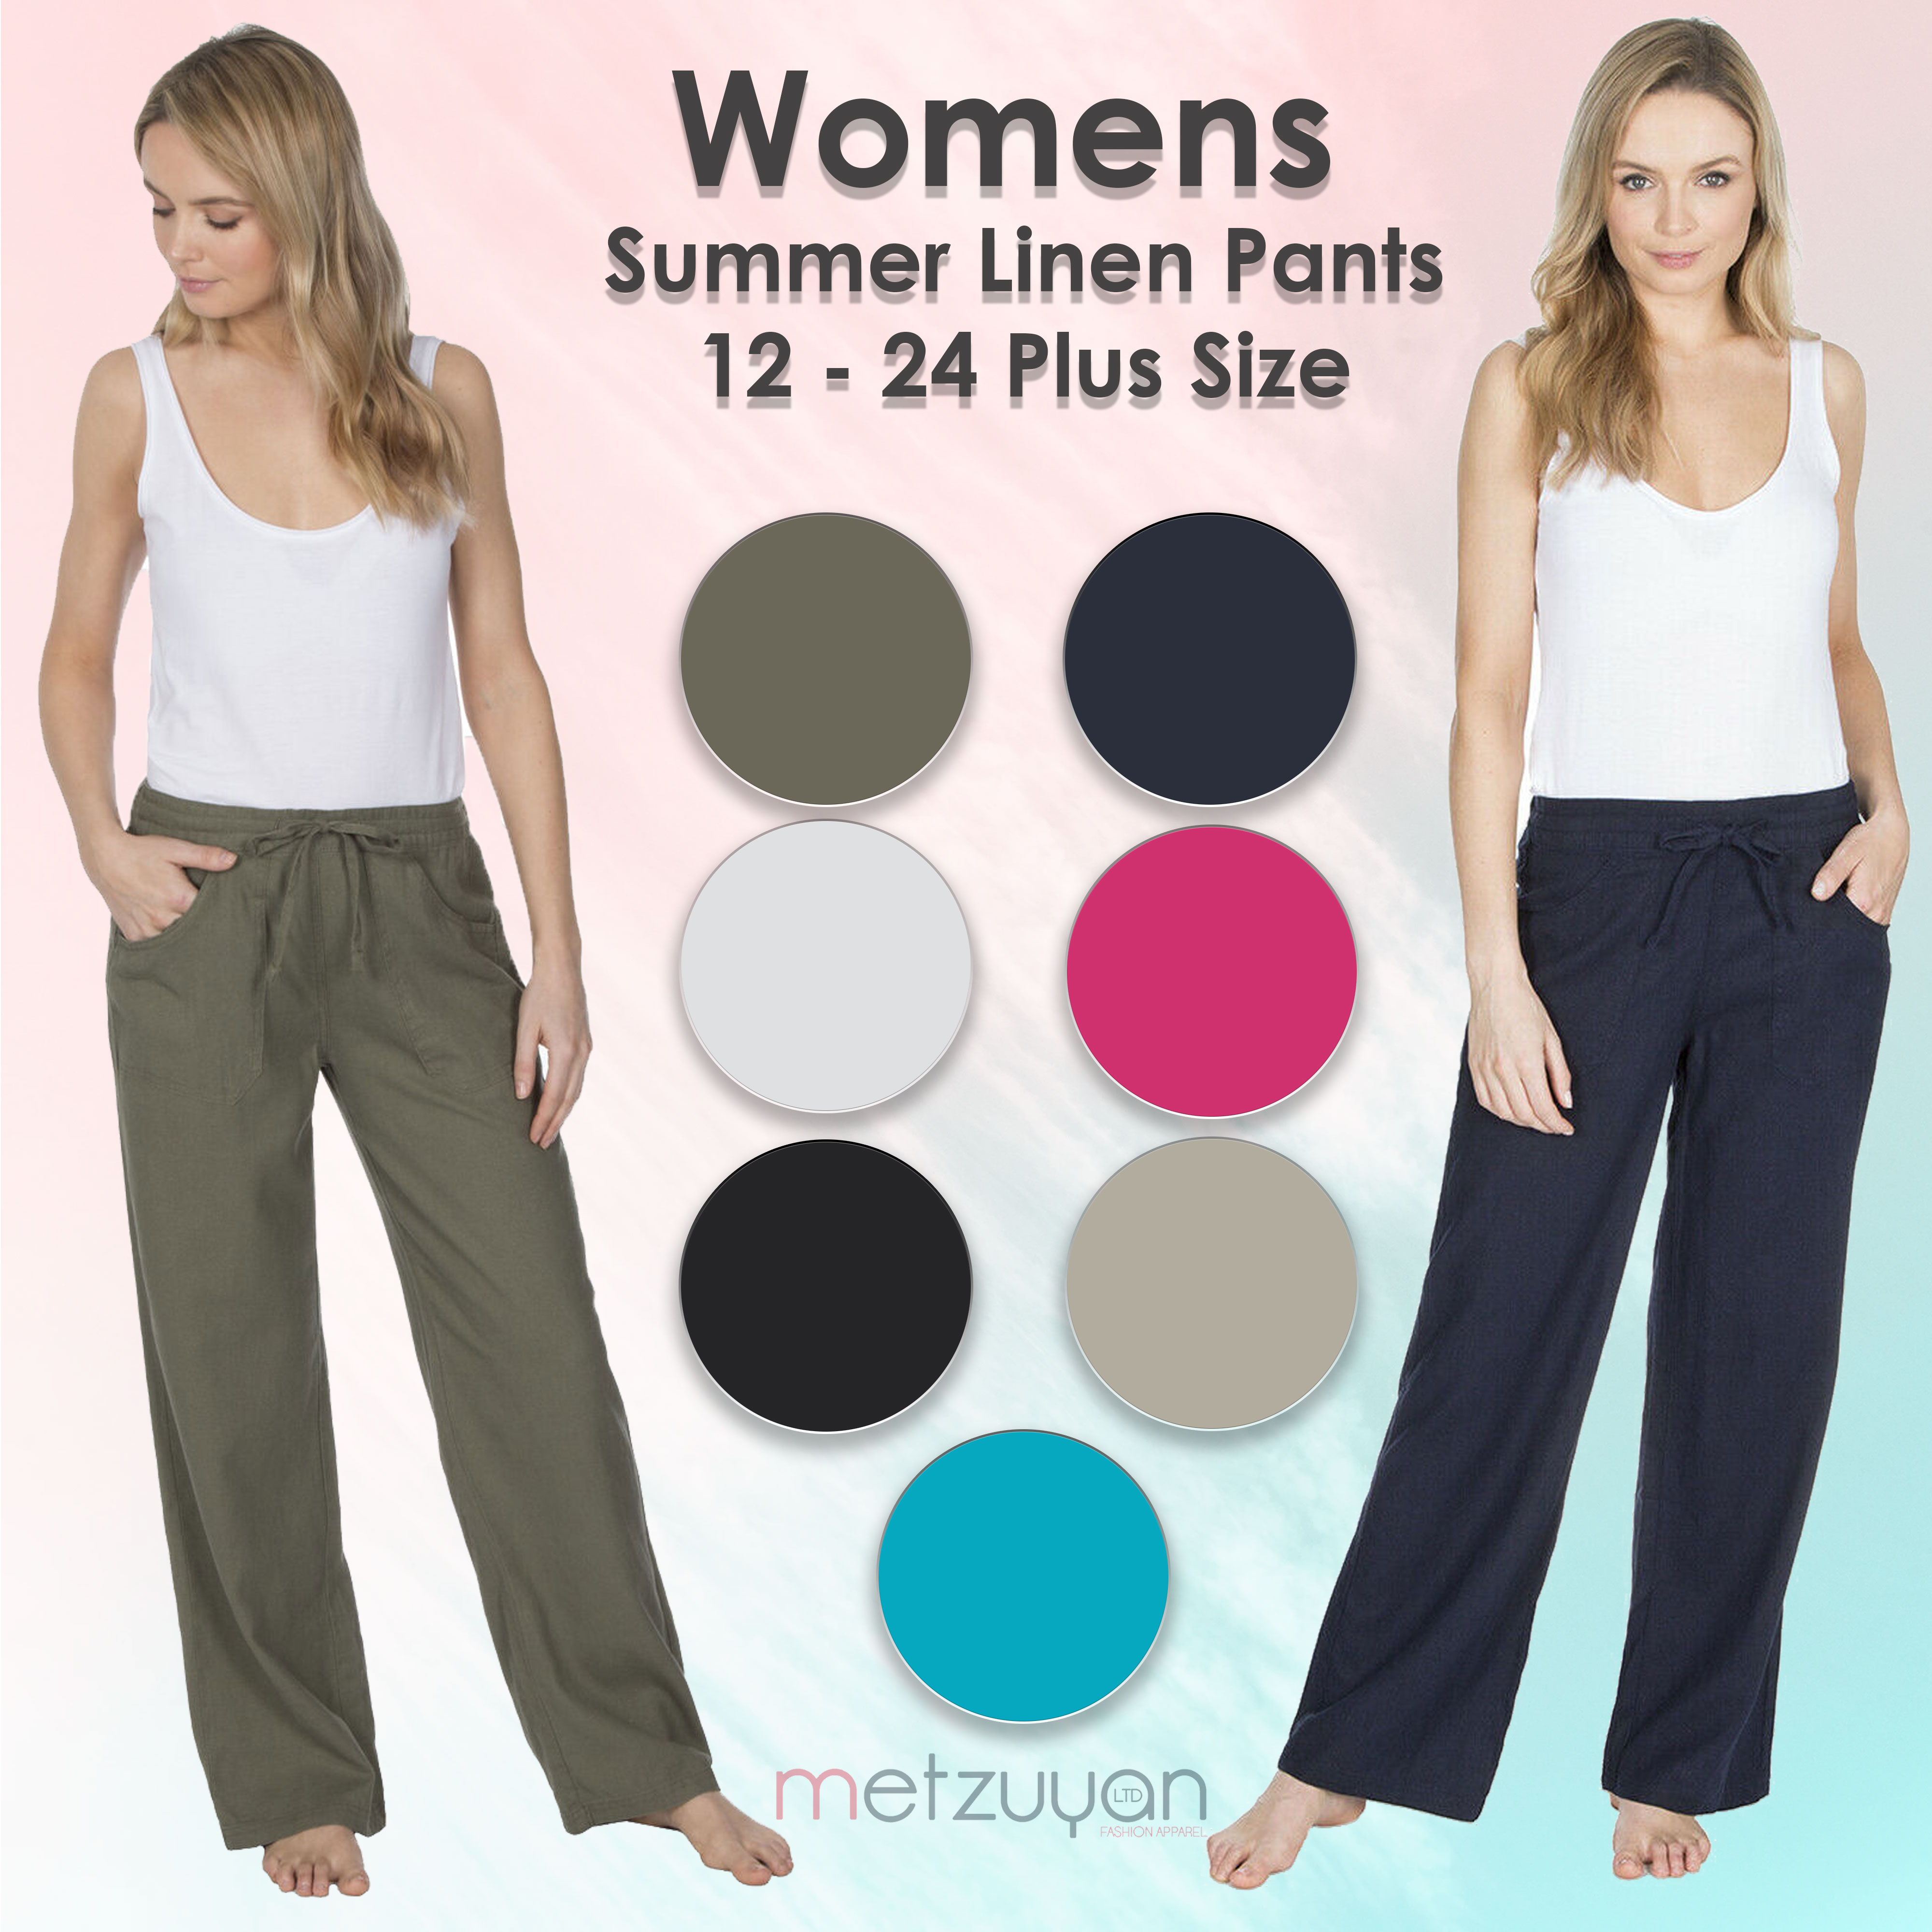 women's plus size pants with pockets